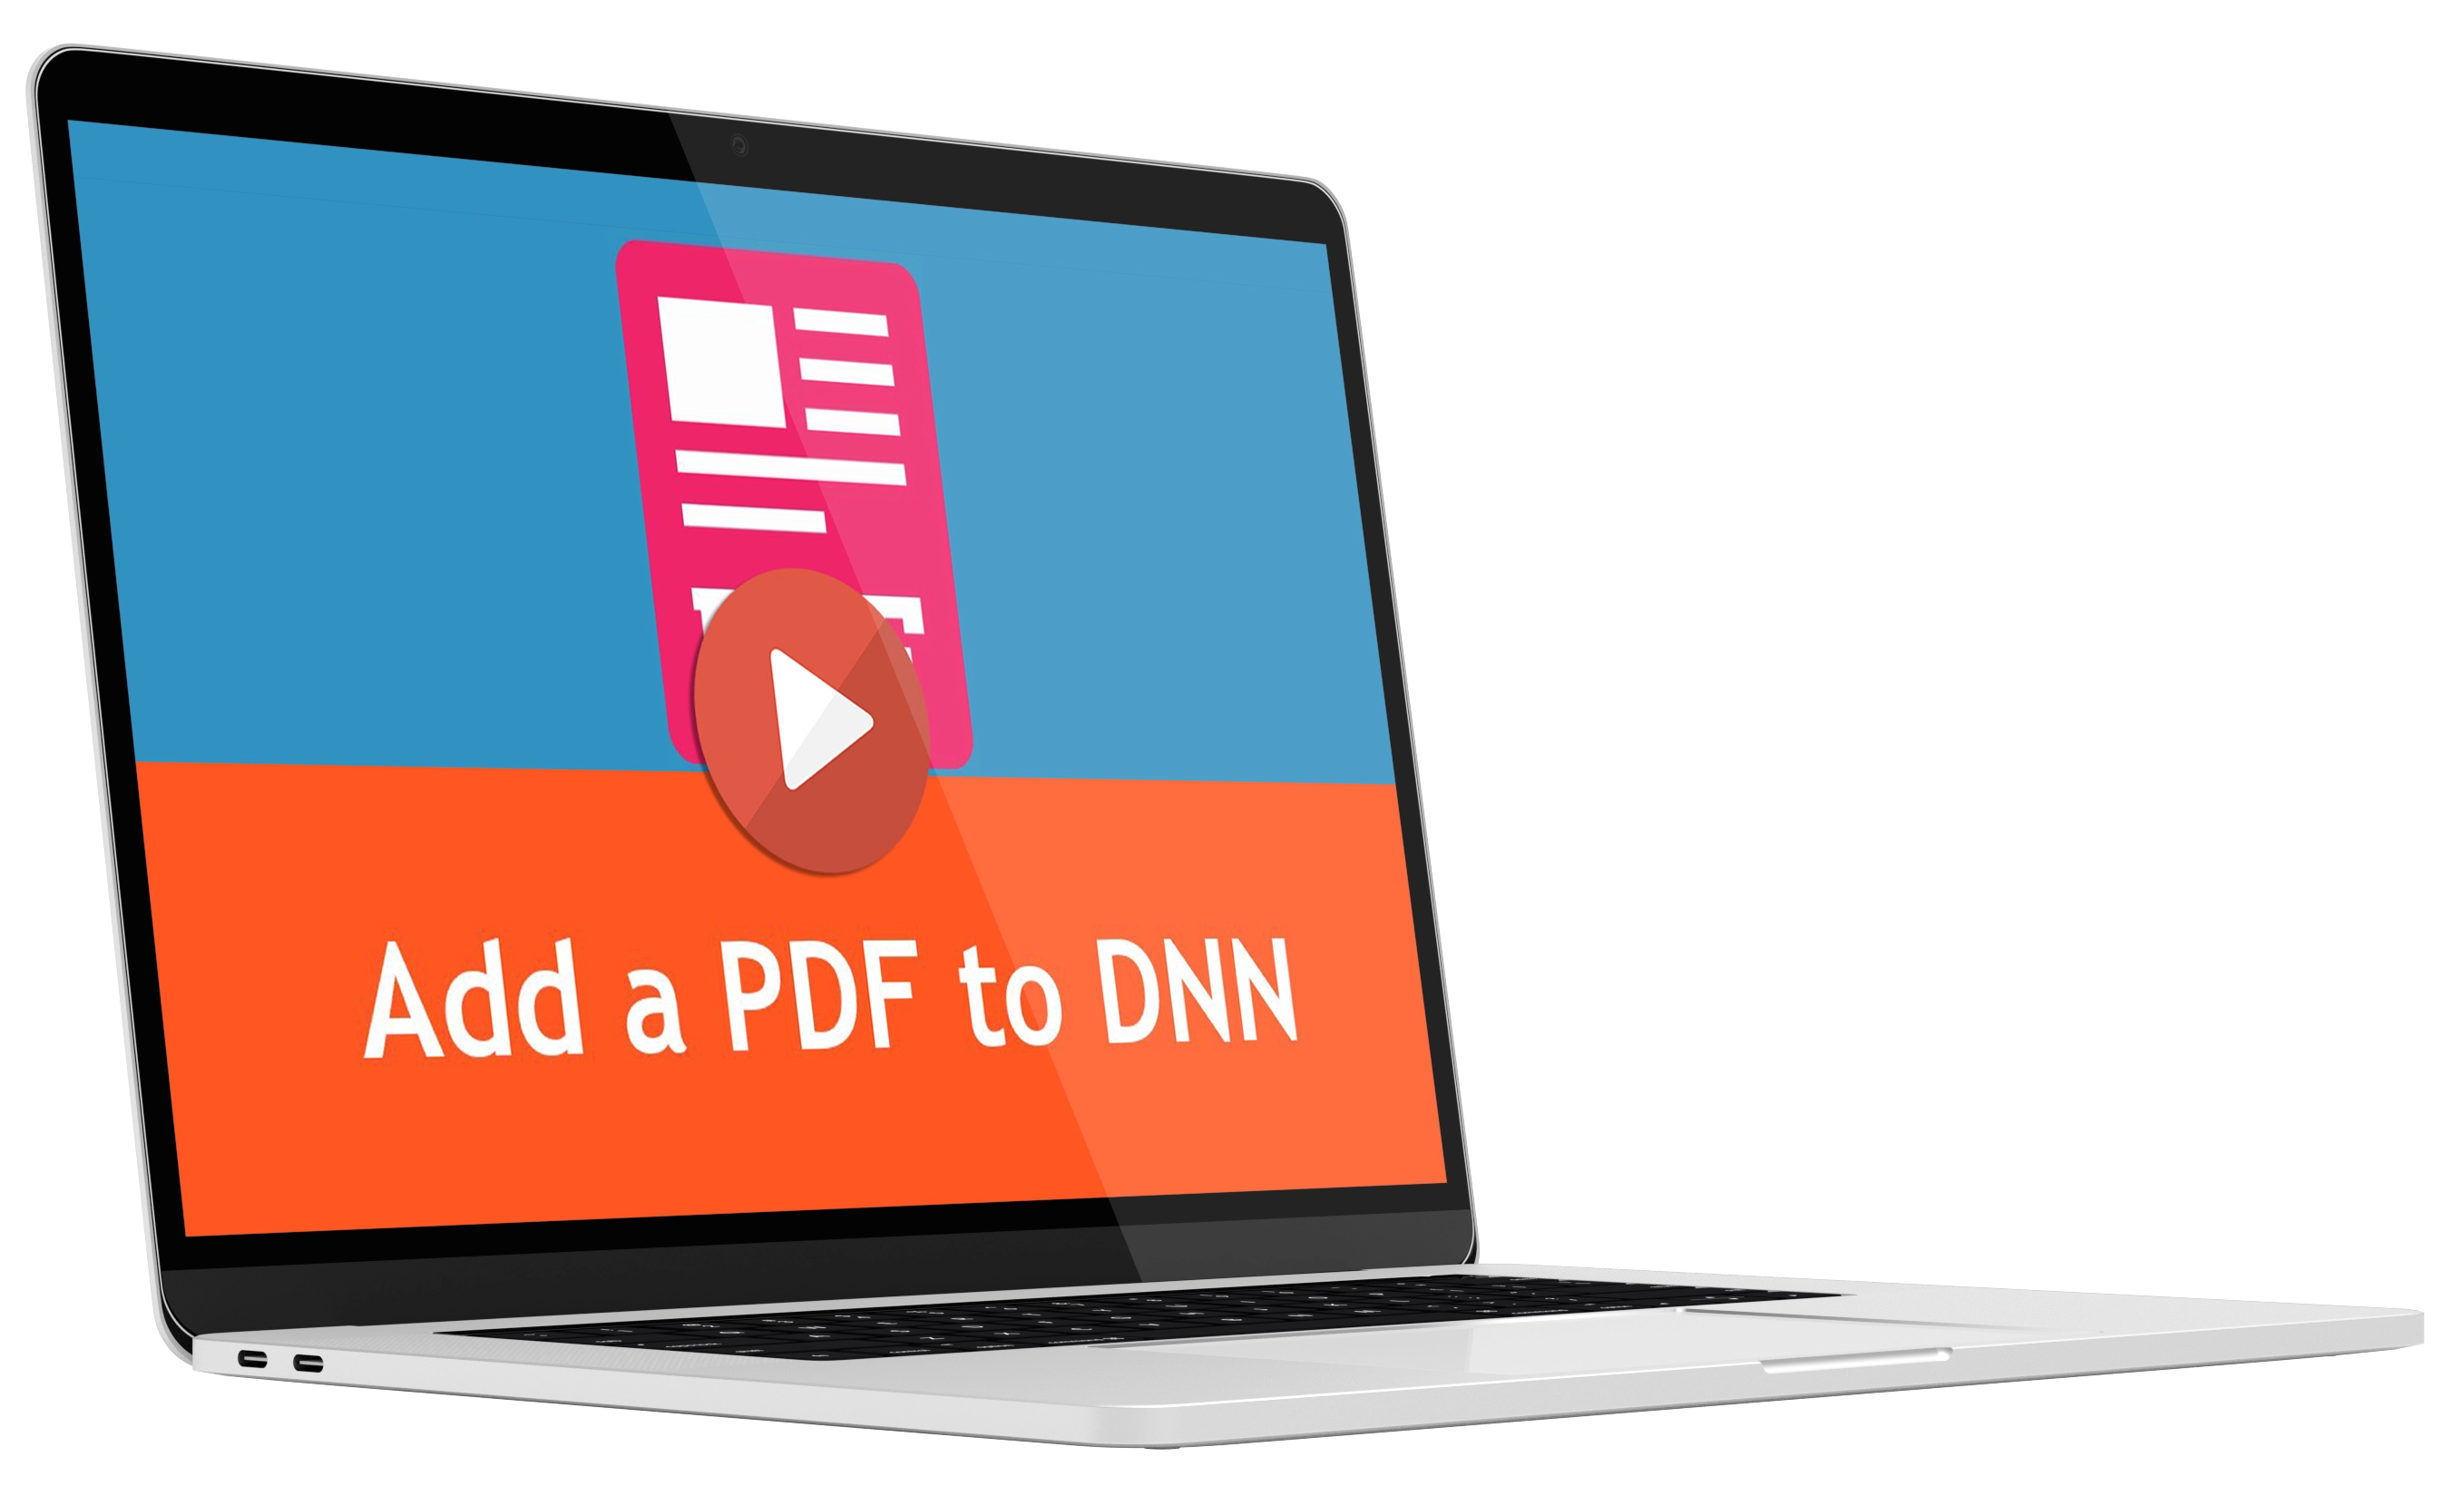 DNN Tutorial #4 Add a PDF file for download to DNN